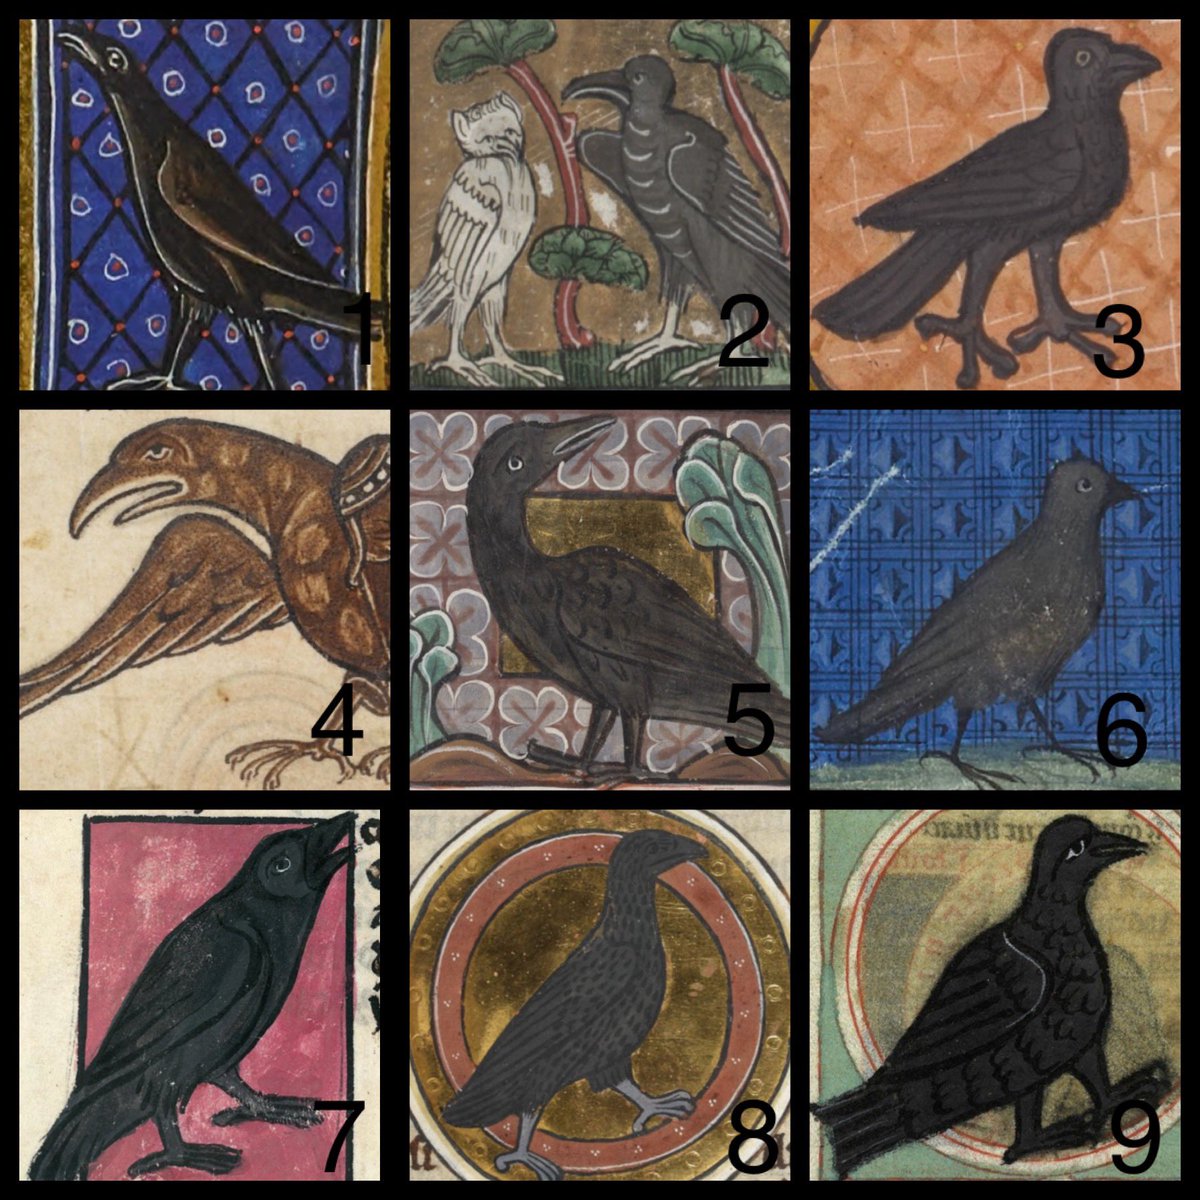 Which medieval crow are you today?